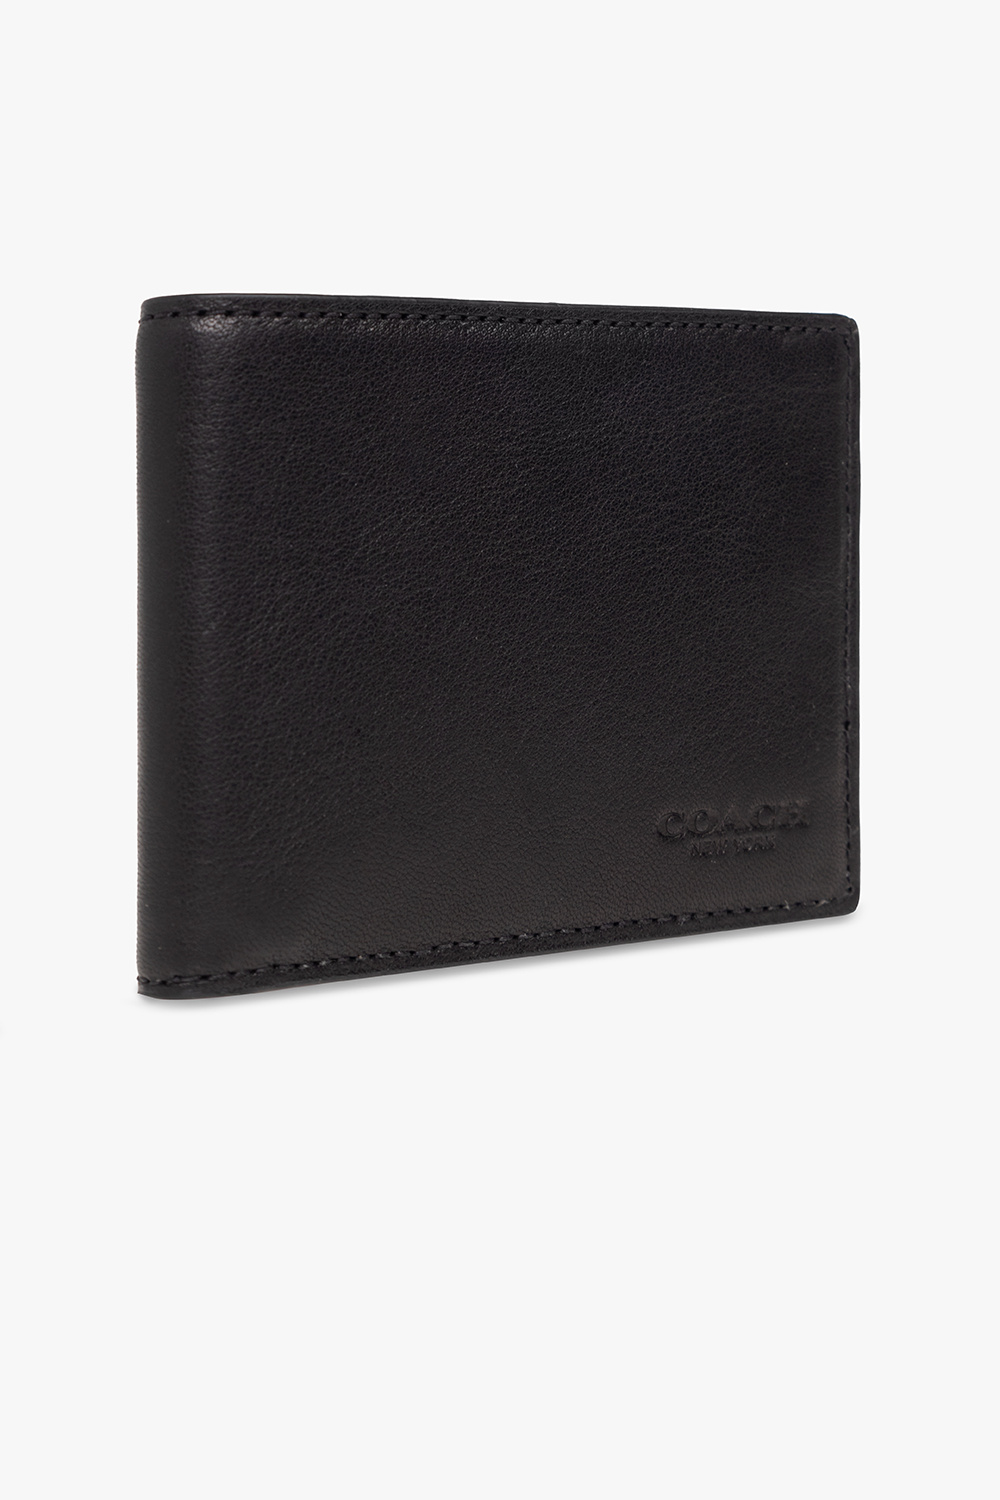 Coach Folding wallet with vintage effect